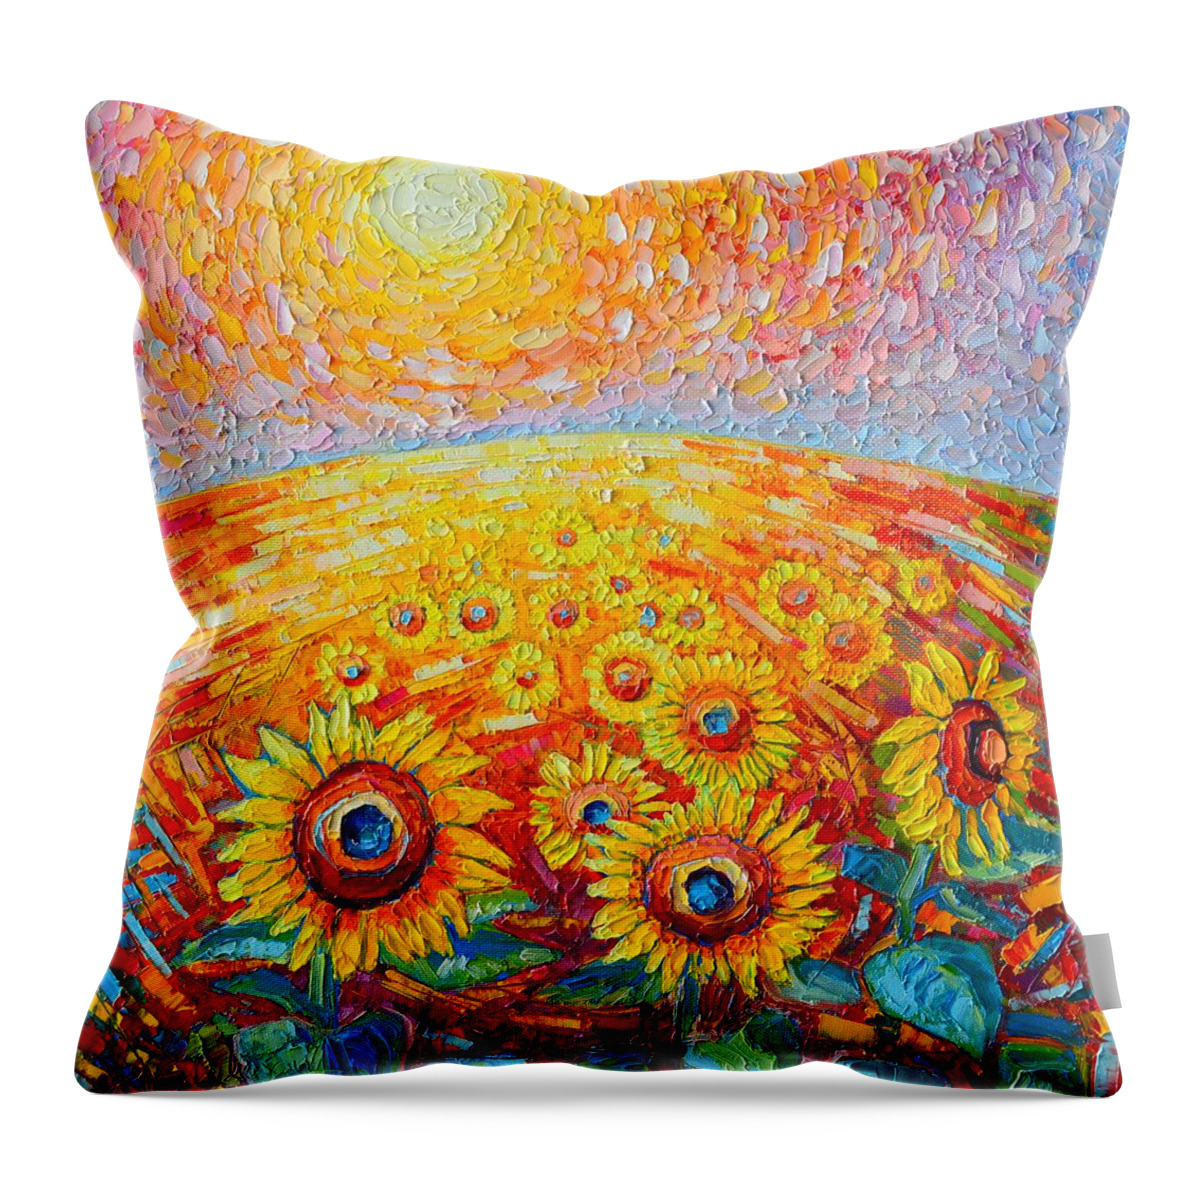 Sunflower Throw Pillow featuring the painting Fields Of Gold - Abstract Landscape With Sunflowers In Sunrise by Ana Maria Edulescu